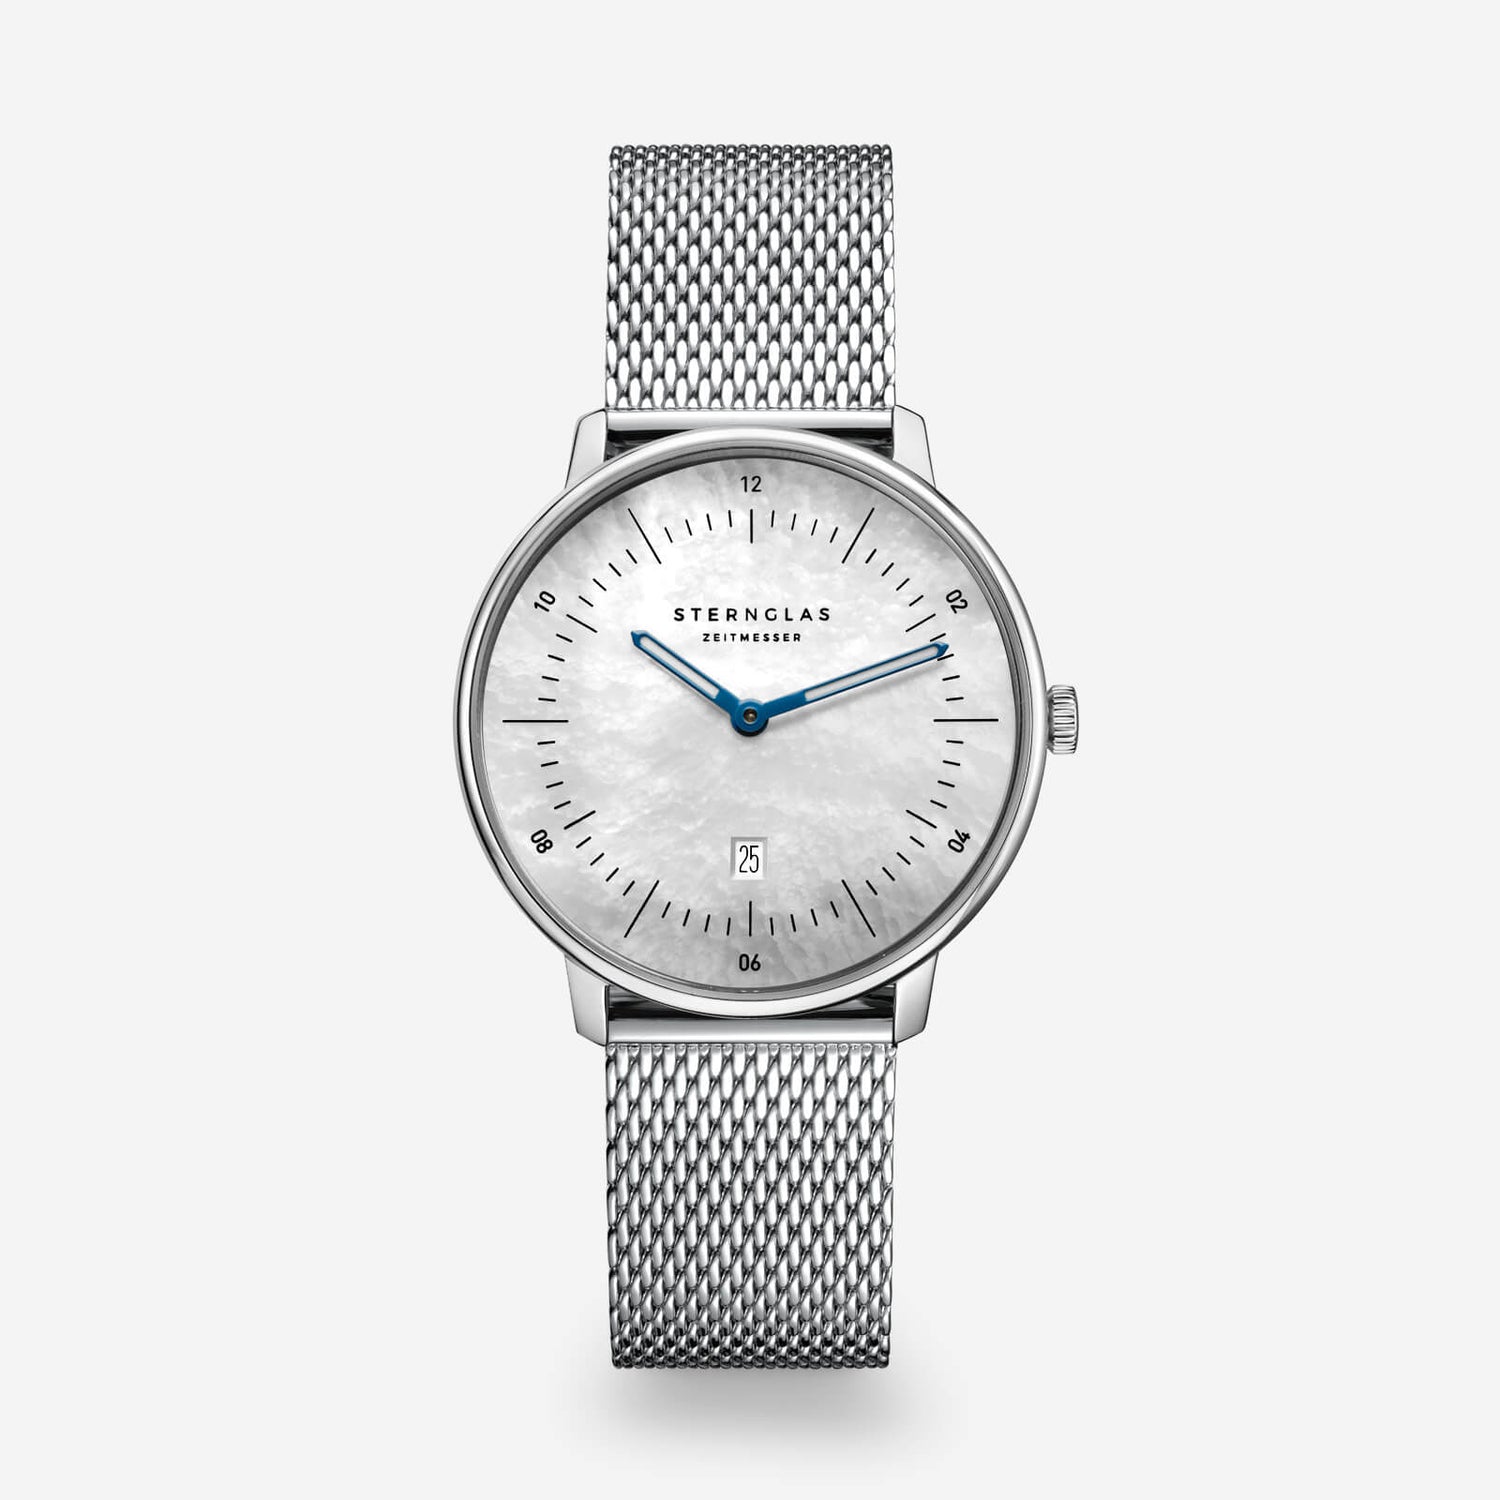 popup|Genuine mother-of-pearl dial|Inspired by the Bauhaus movement of the 1920s, the dial is minimalist and clear. "Form follows function".